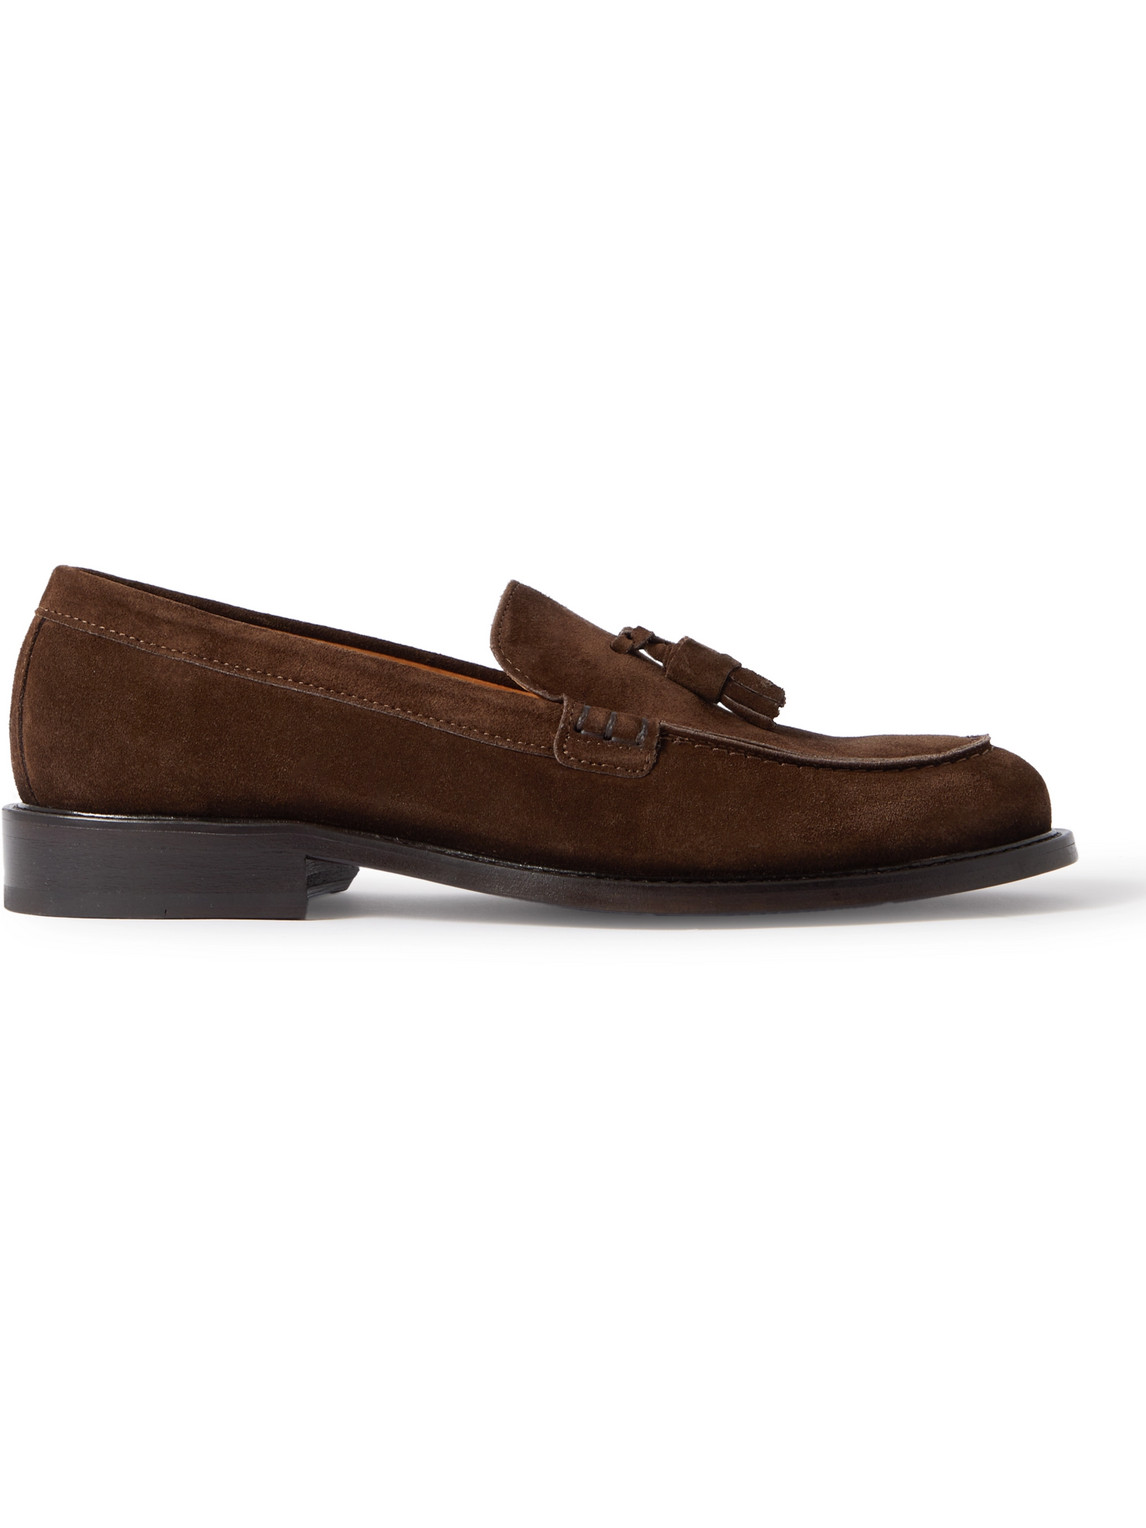 Tasseled Regenerated Suede by evolo® Loafers